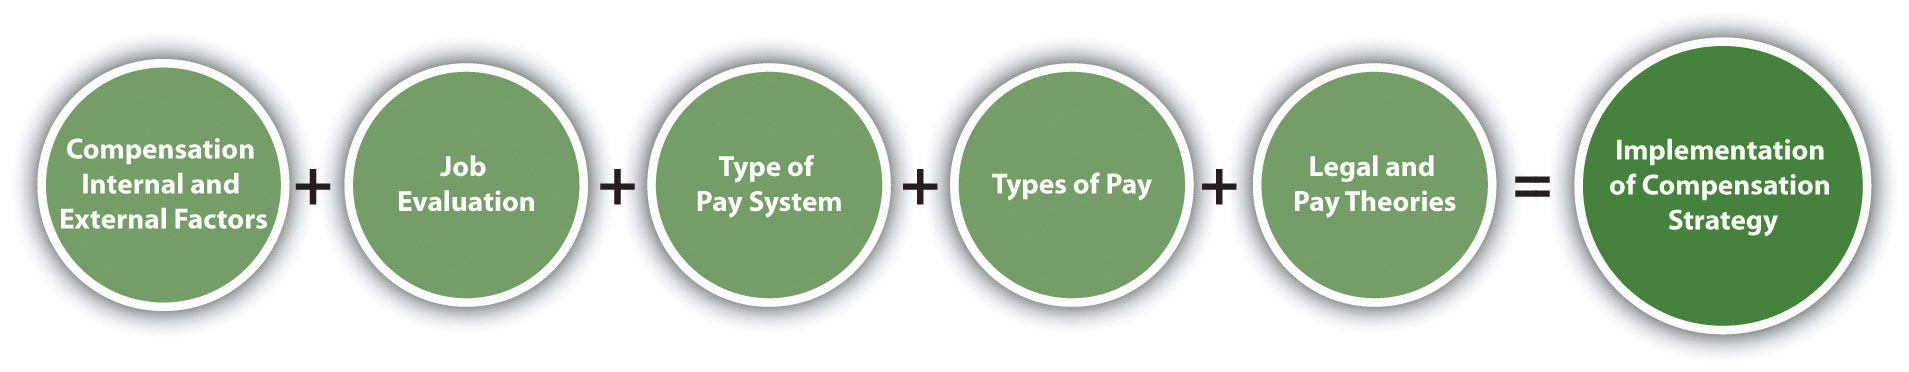 The process for implementing compensation strategy: compensation internal and external factors + job evaluation + type of pay system + types of pay + legal and pay theories = implementation of compensation strategy.